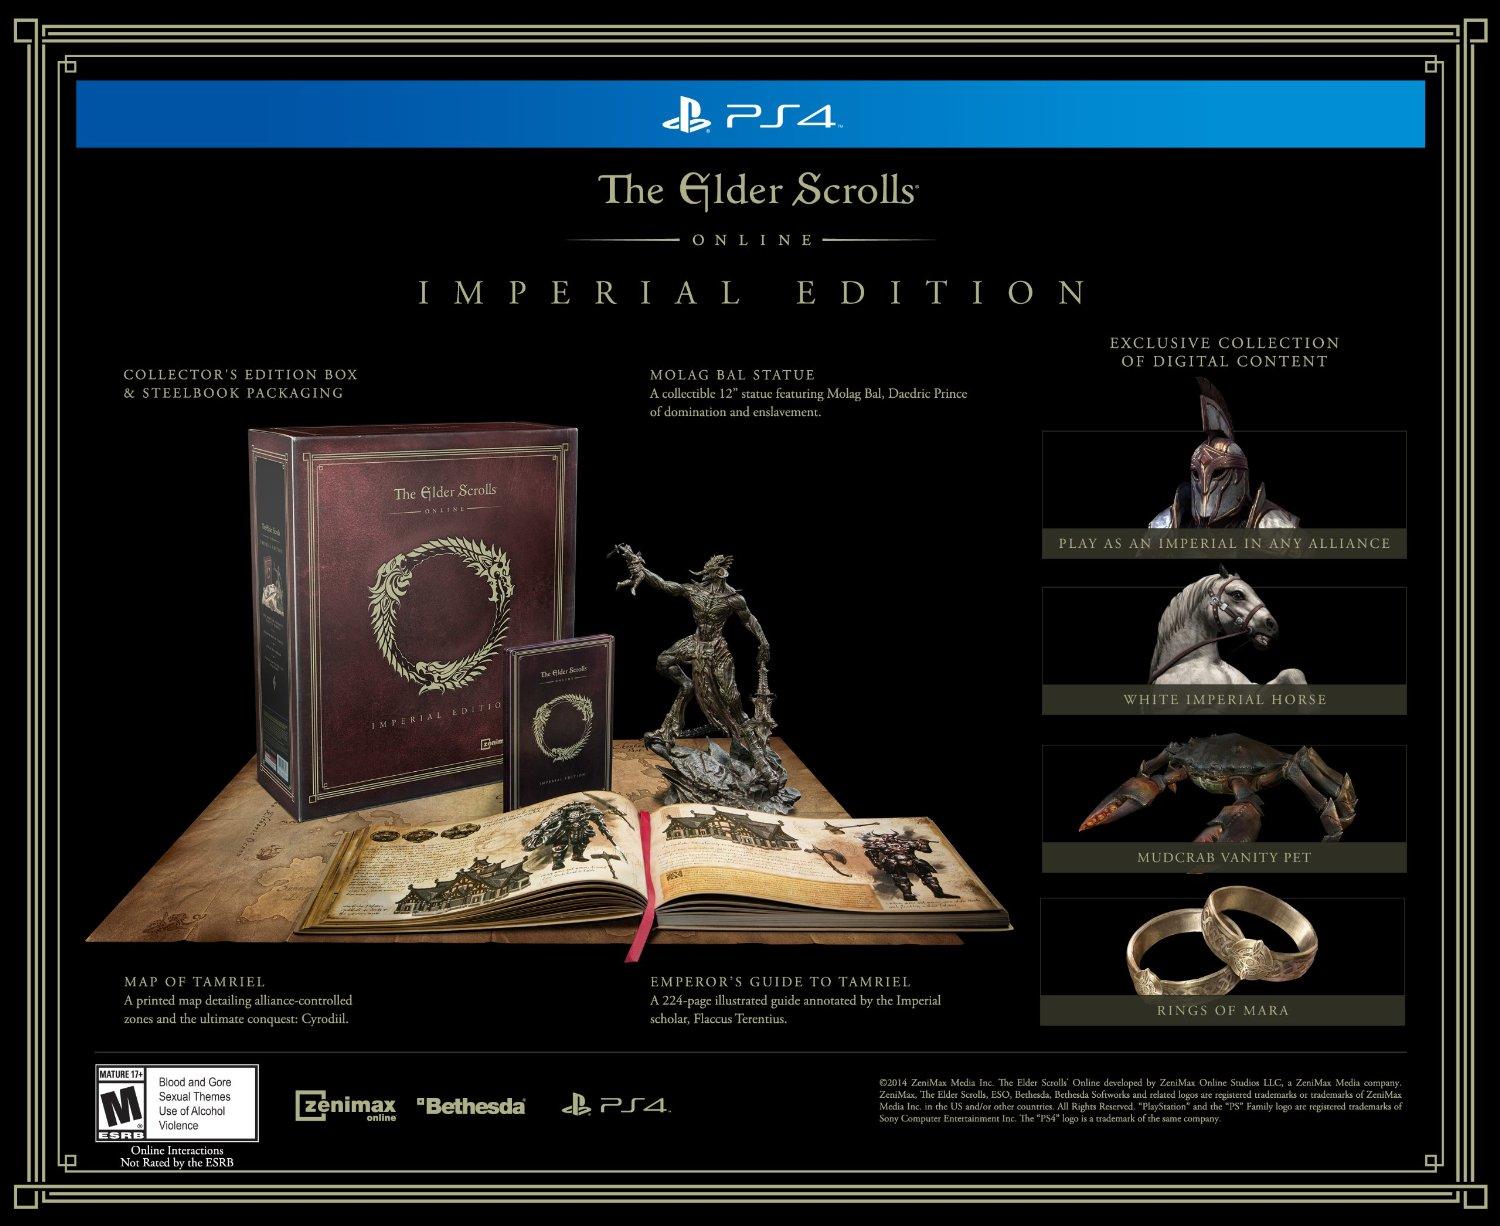 Amazon Leak Shows “Imperial Edition” of TESO With Playable Imperial Race